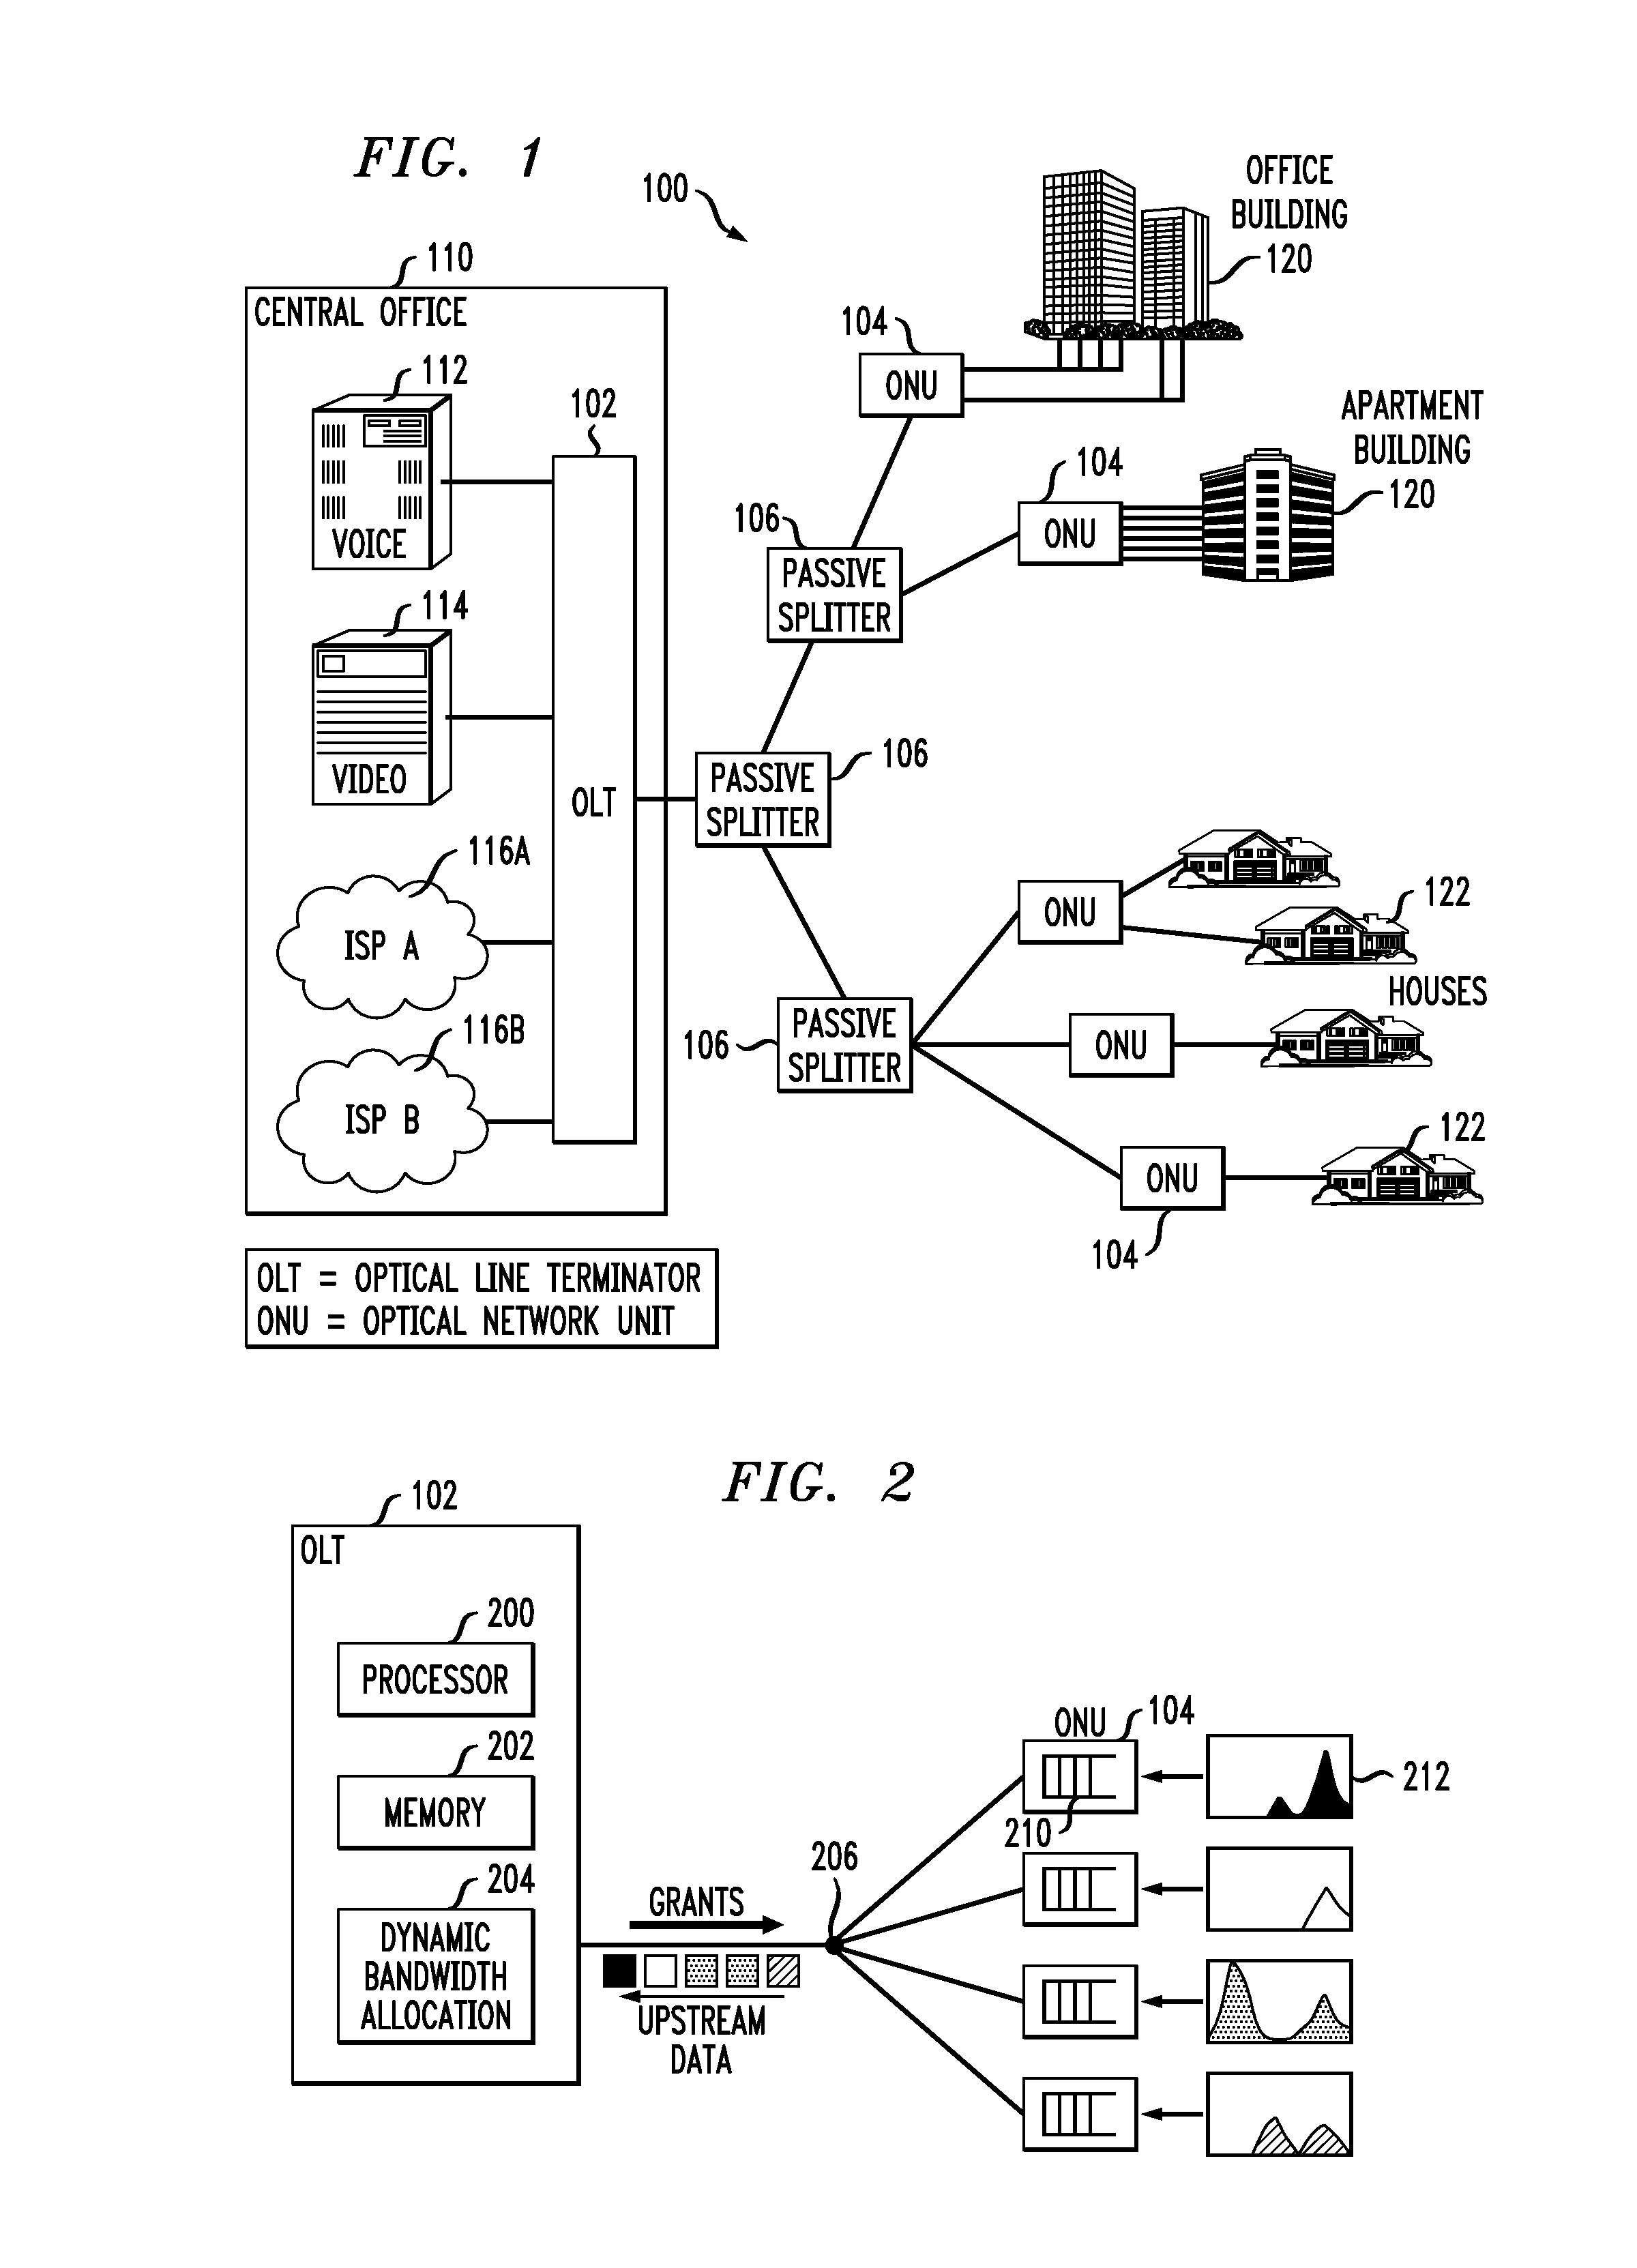 Allocating upstream bandwidth in an optical communication network